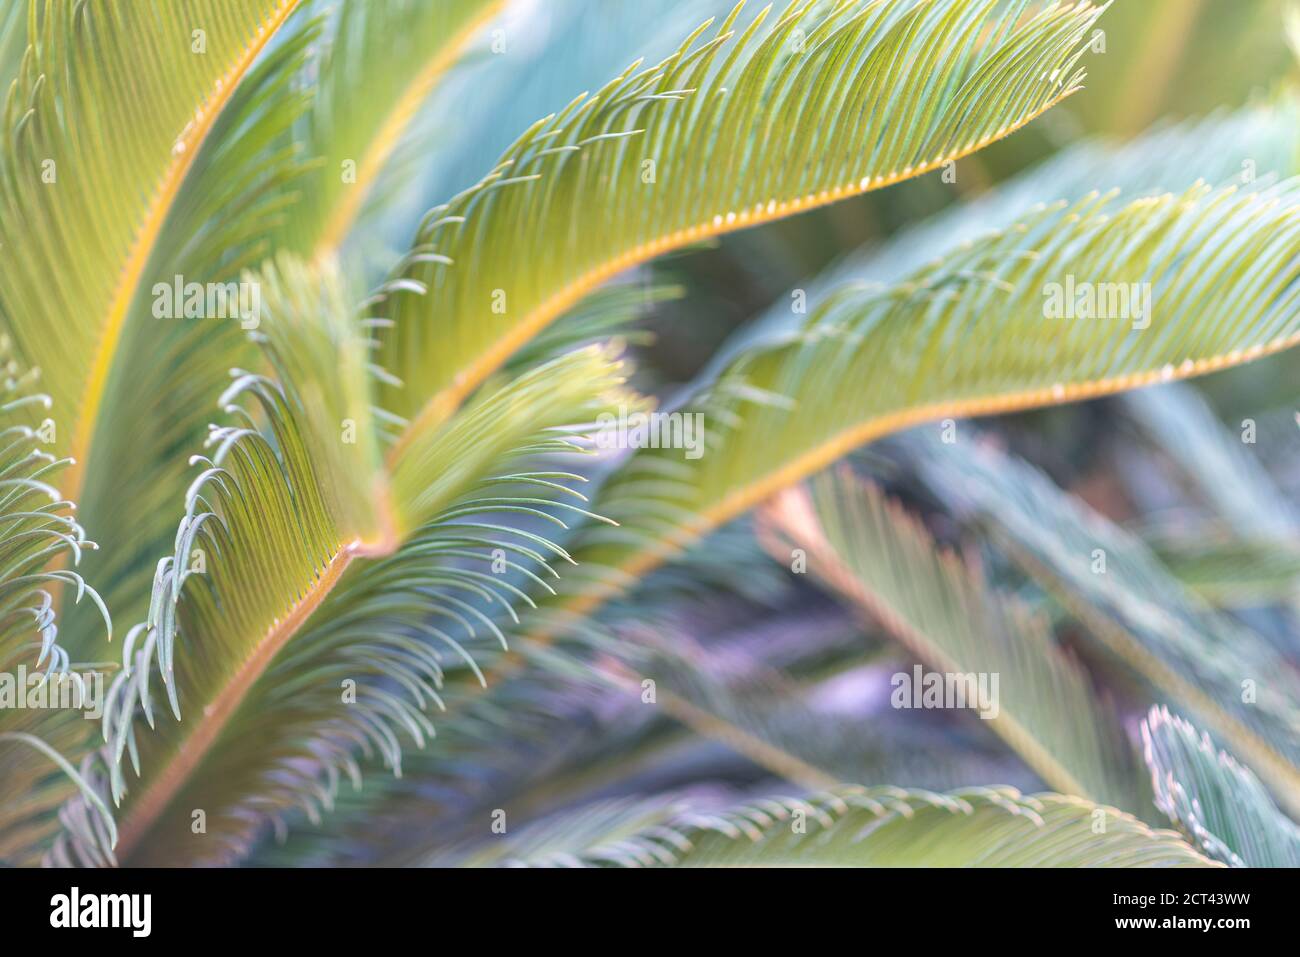 Tropical palm leaves, floral pattern blurred background, real photo. Stock Photo